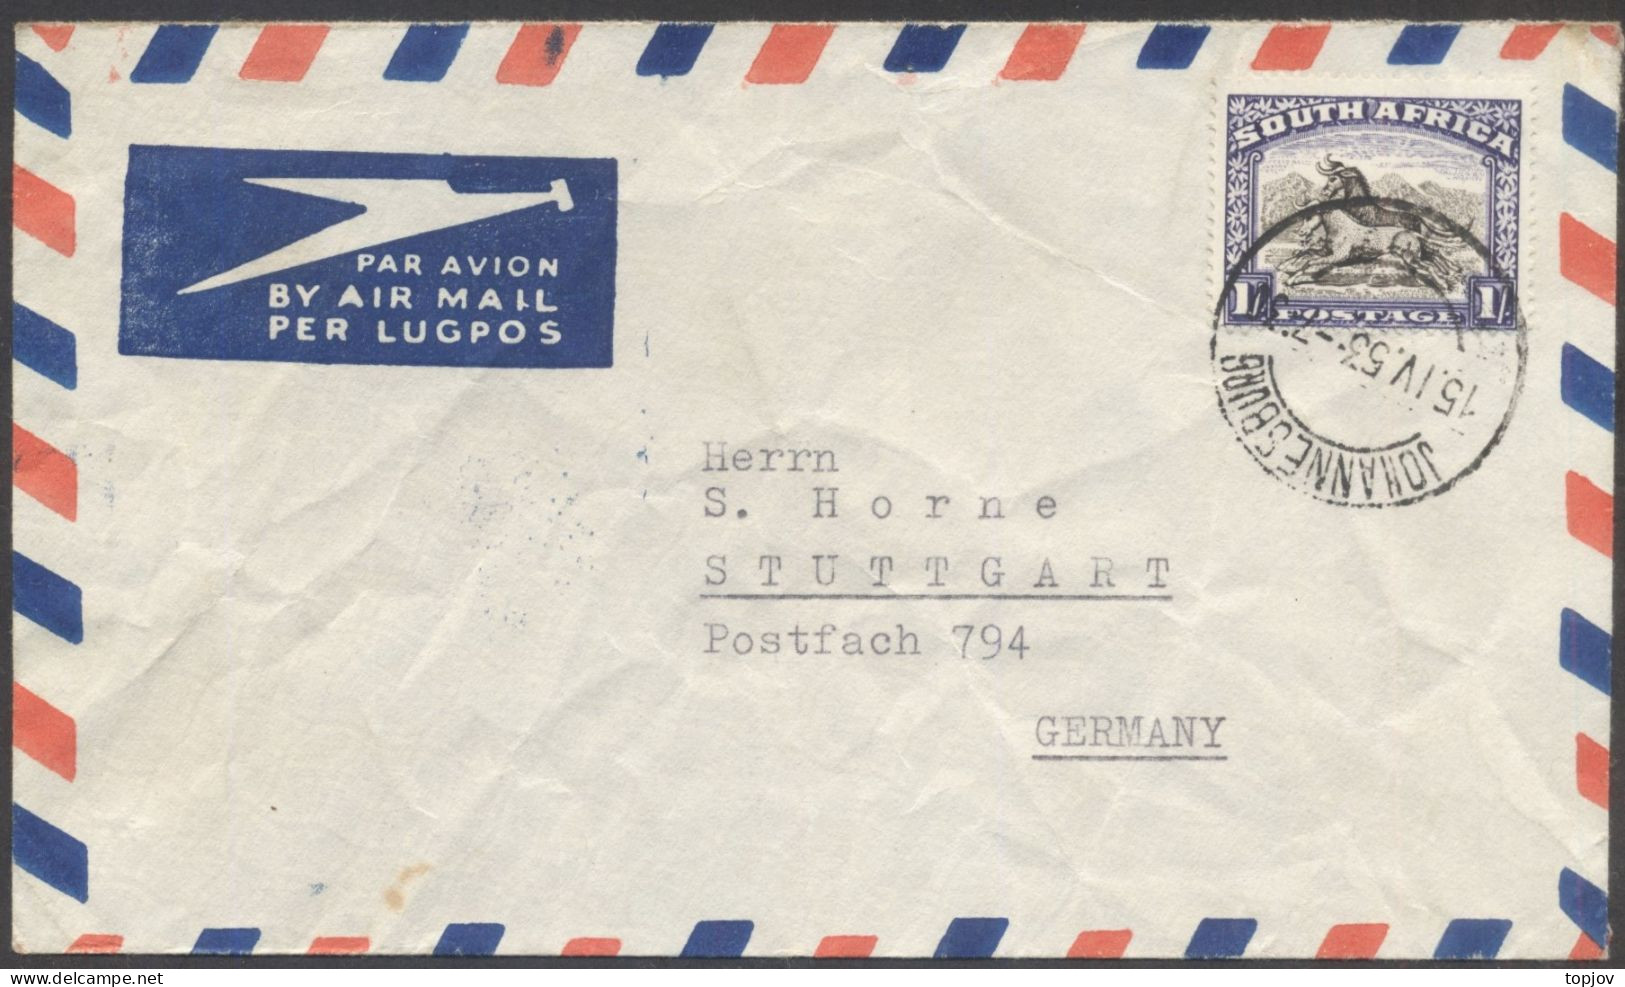 SOUTH AFRICA  RSA - JOHANNESBURG To GERMANY AIRMAIL - ANIMALS - 1953 - Aéreo